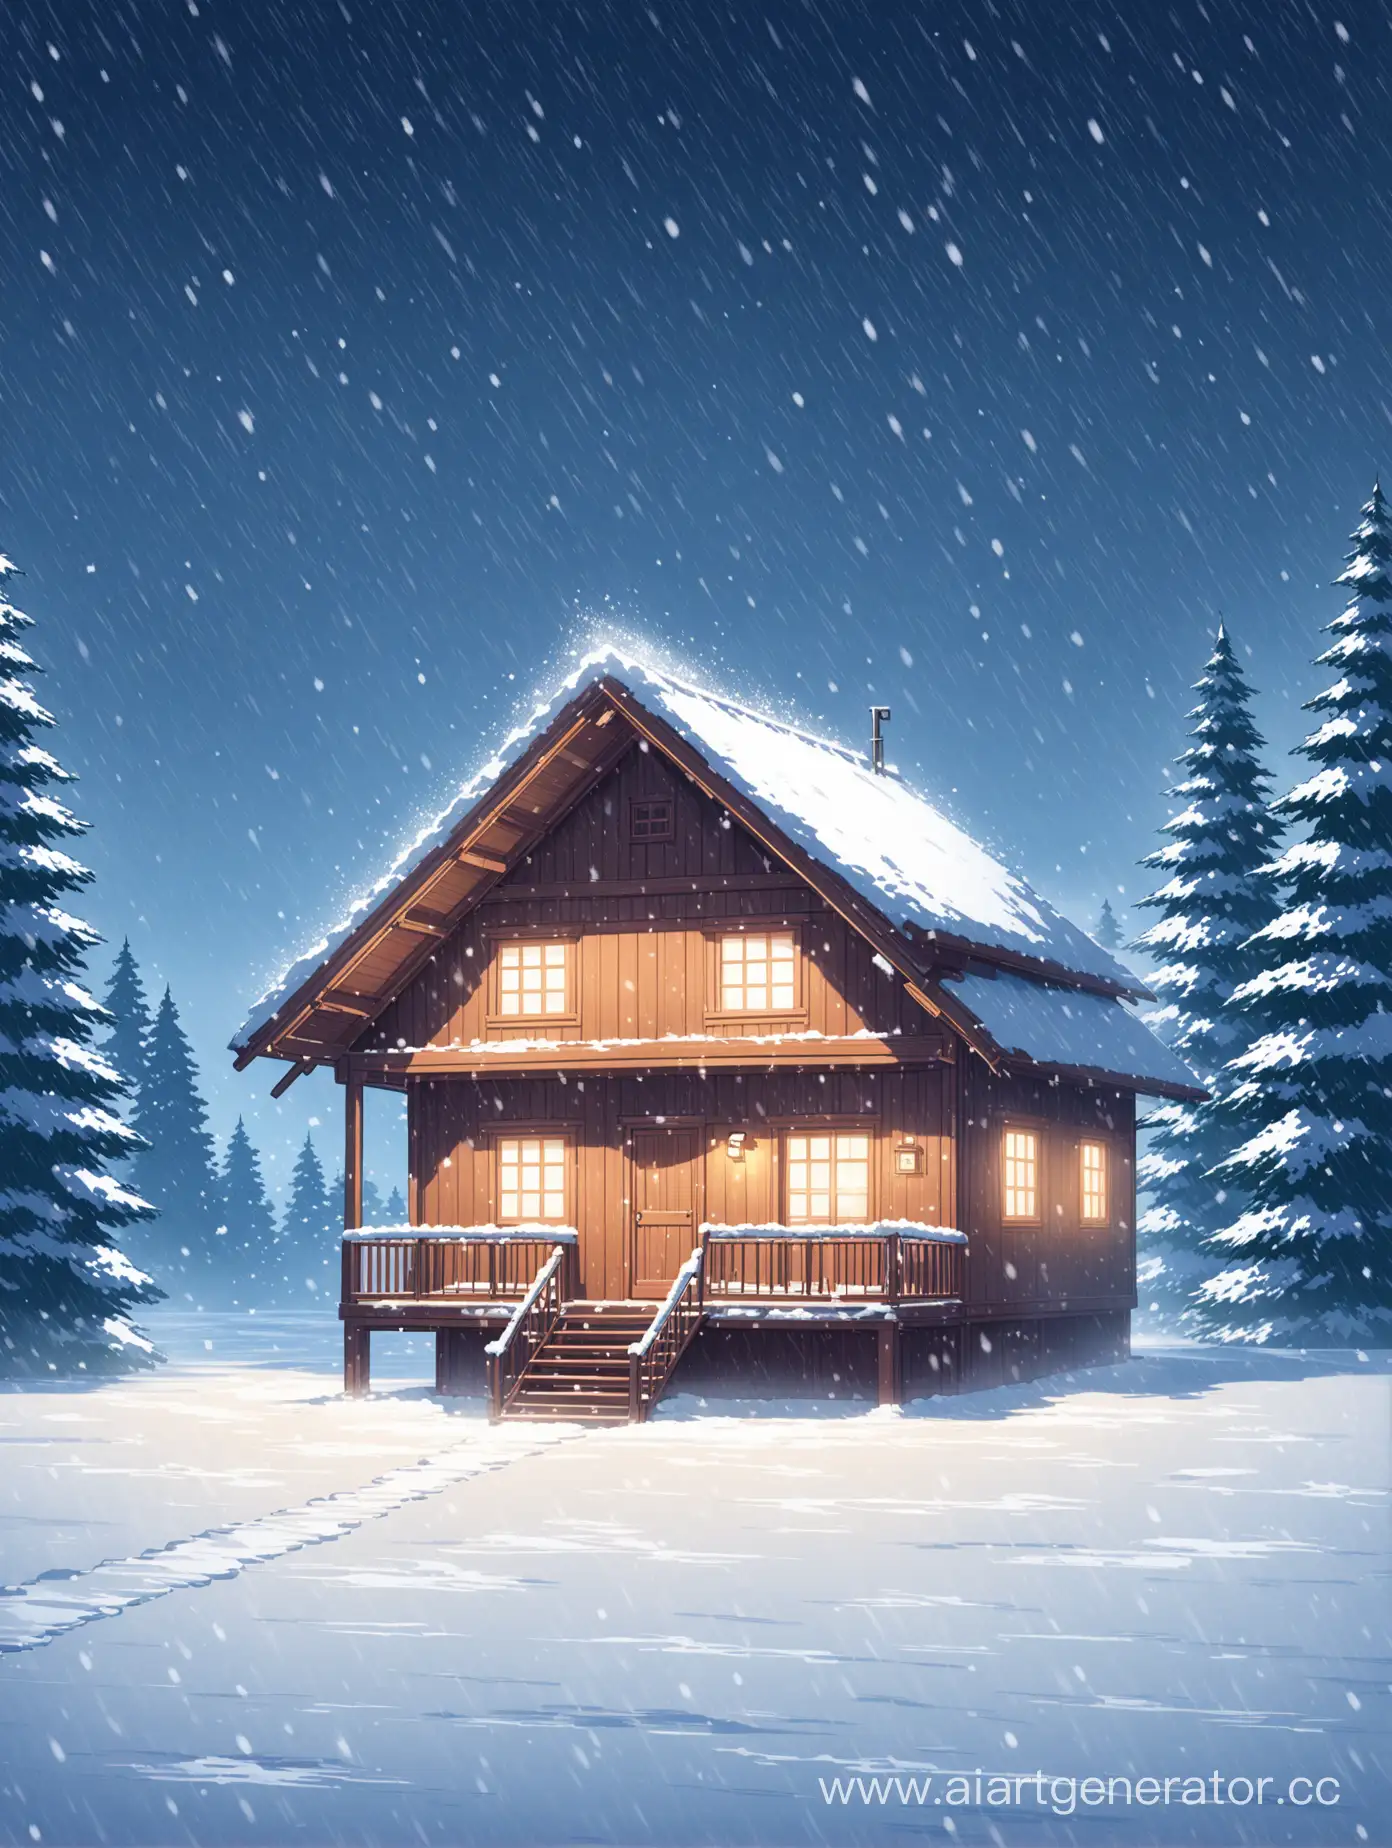 Snowy-Anime-Style-Wooden-House-in-a-Blizzard